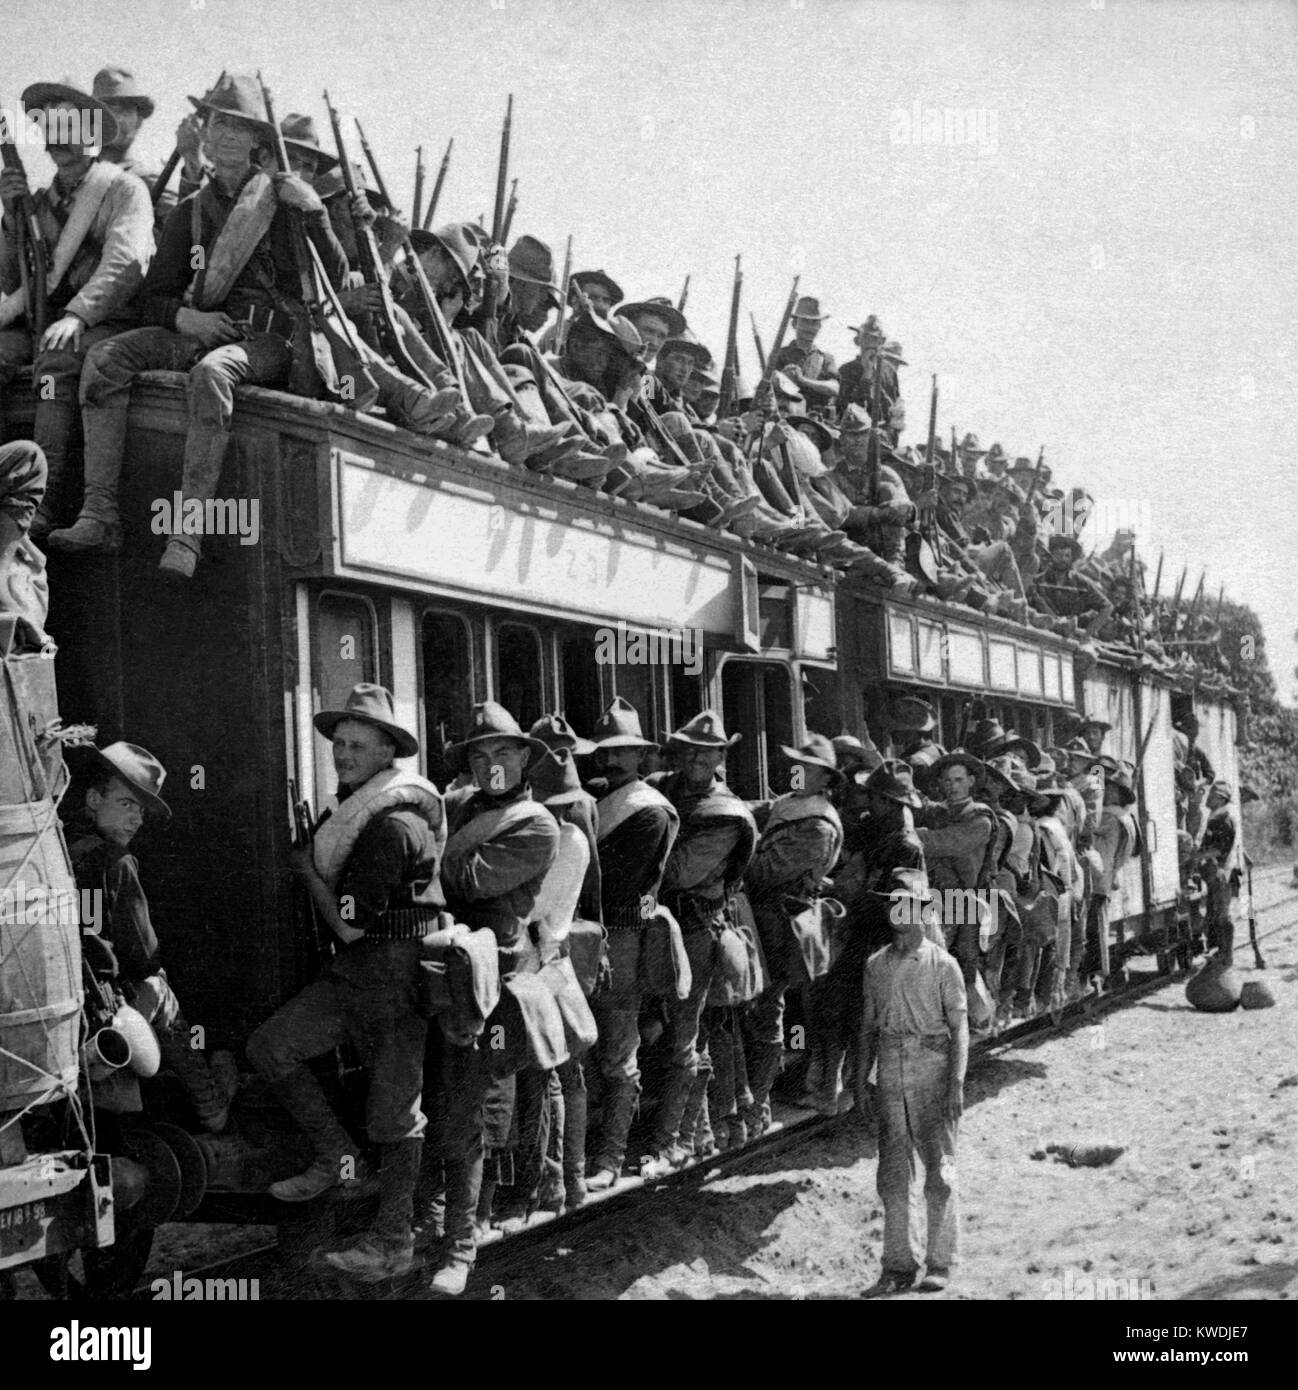 17th Infantry going to the front in a train during the Philippine-American War. Following the first six months of the war in 1899, the Filipino insurgents moved to the northern interior and adopted guerrilla tactics (BSLOC 2017 10 82) Stock Photo